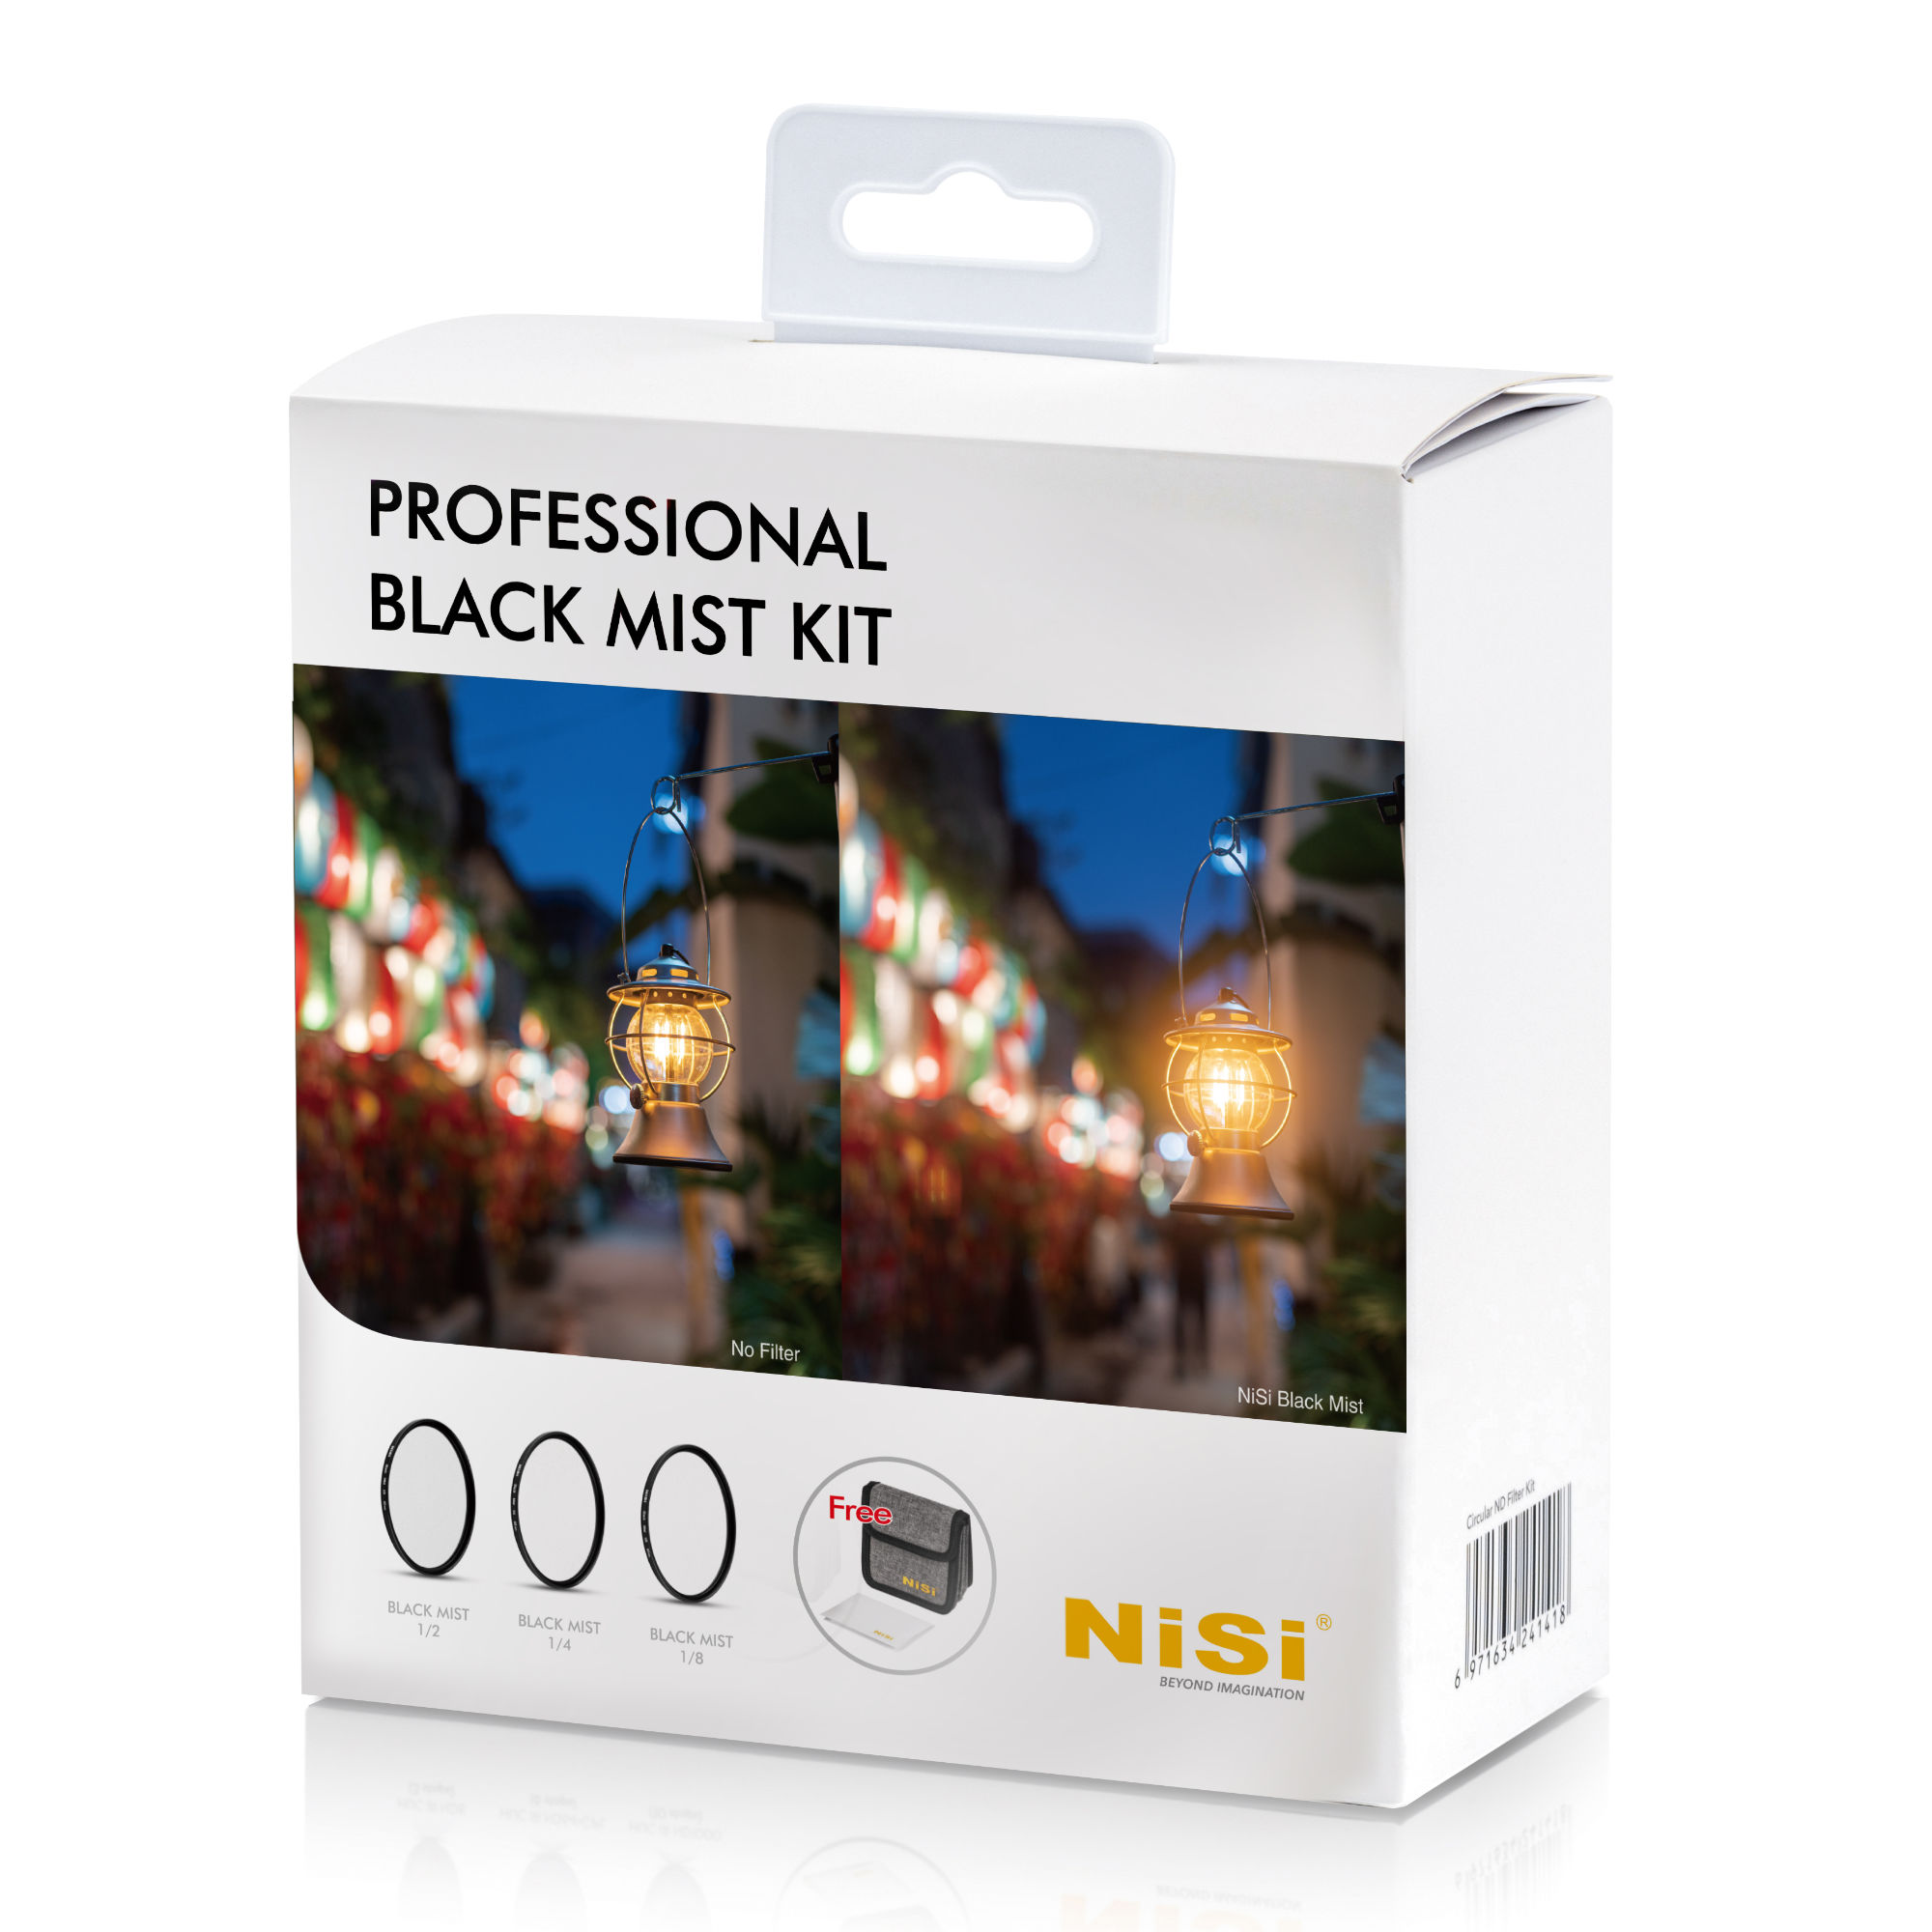 NiSi 49mm Professional Black Mist Kit with 1/2, 1/4, 1/8 and Case